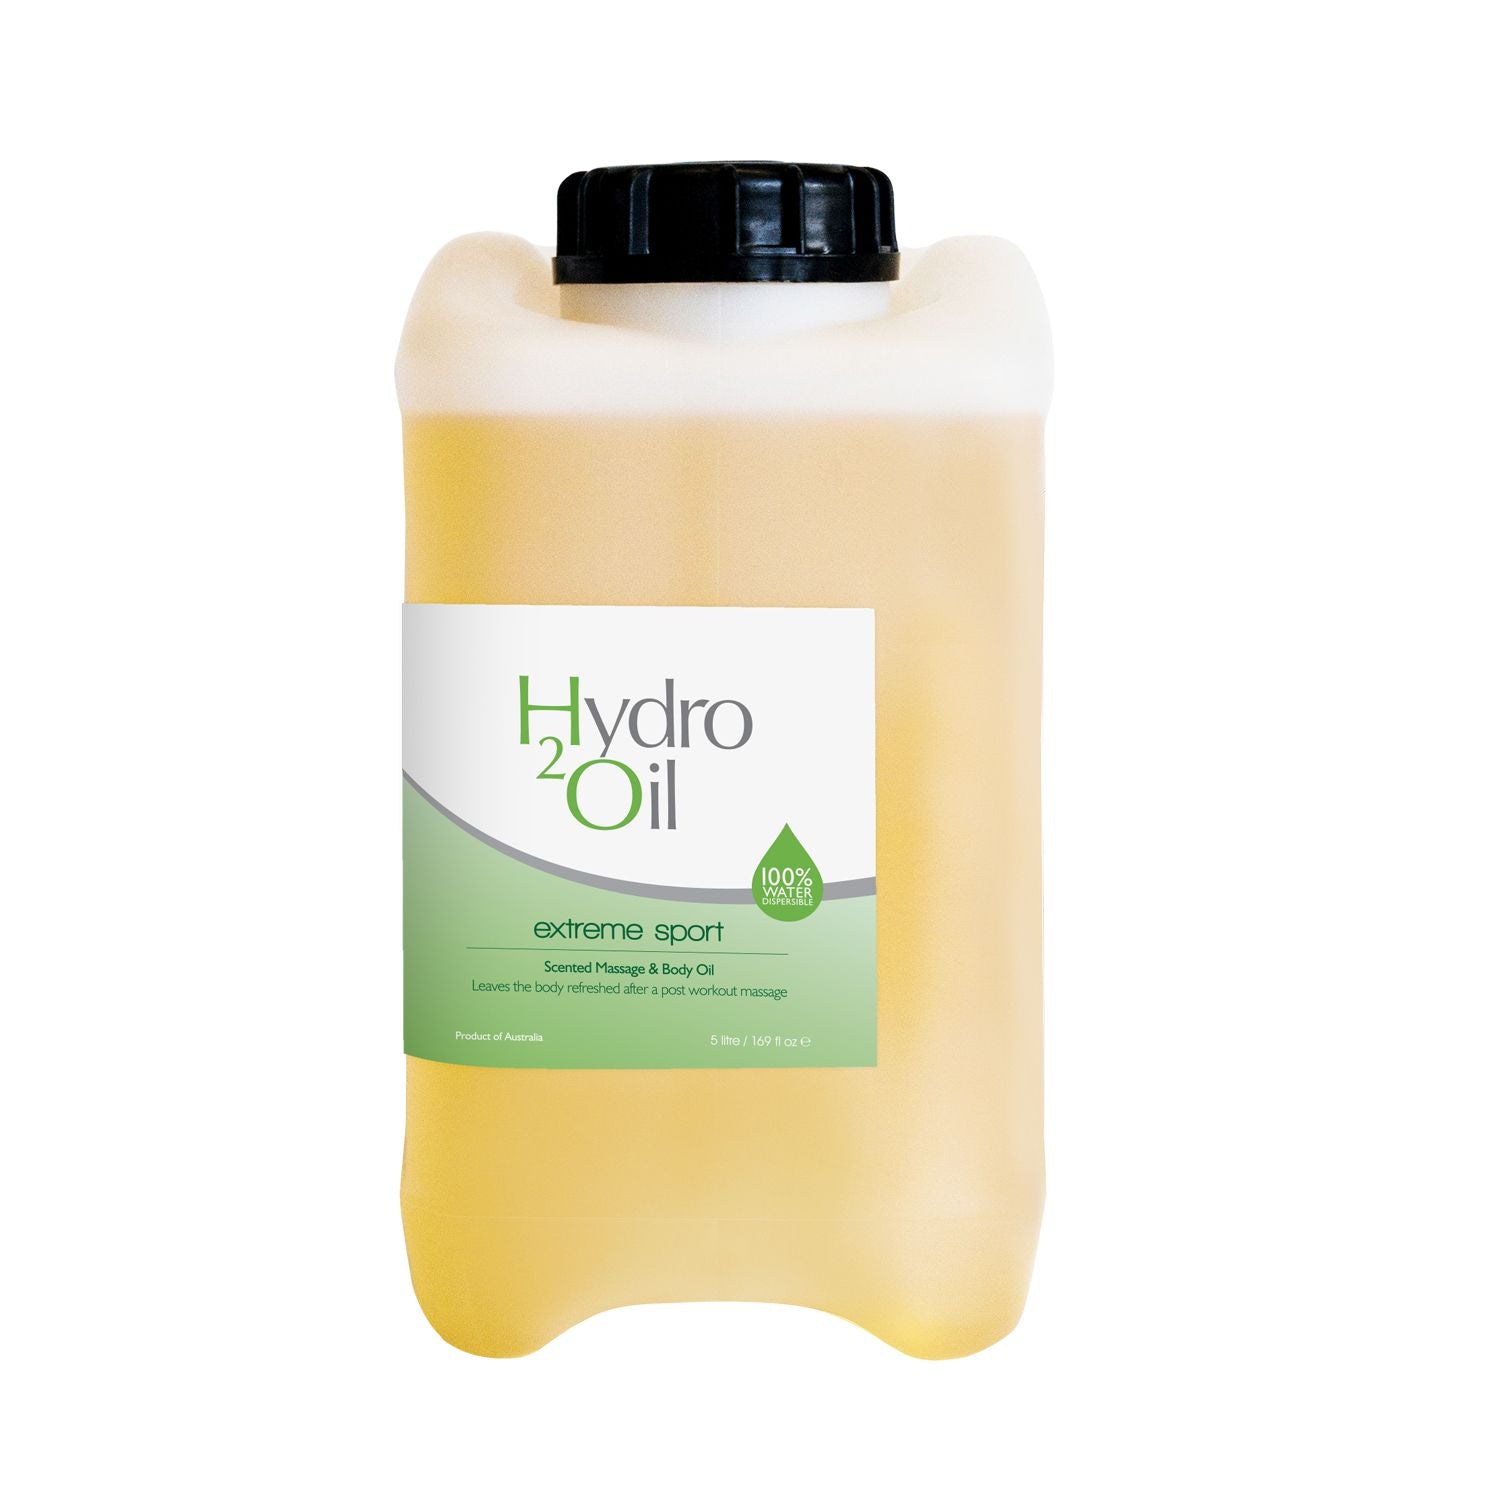 Hydro 2 Oil Extreme Sport - with pouring tap 5L